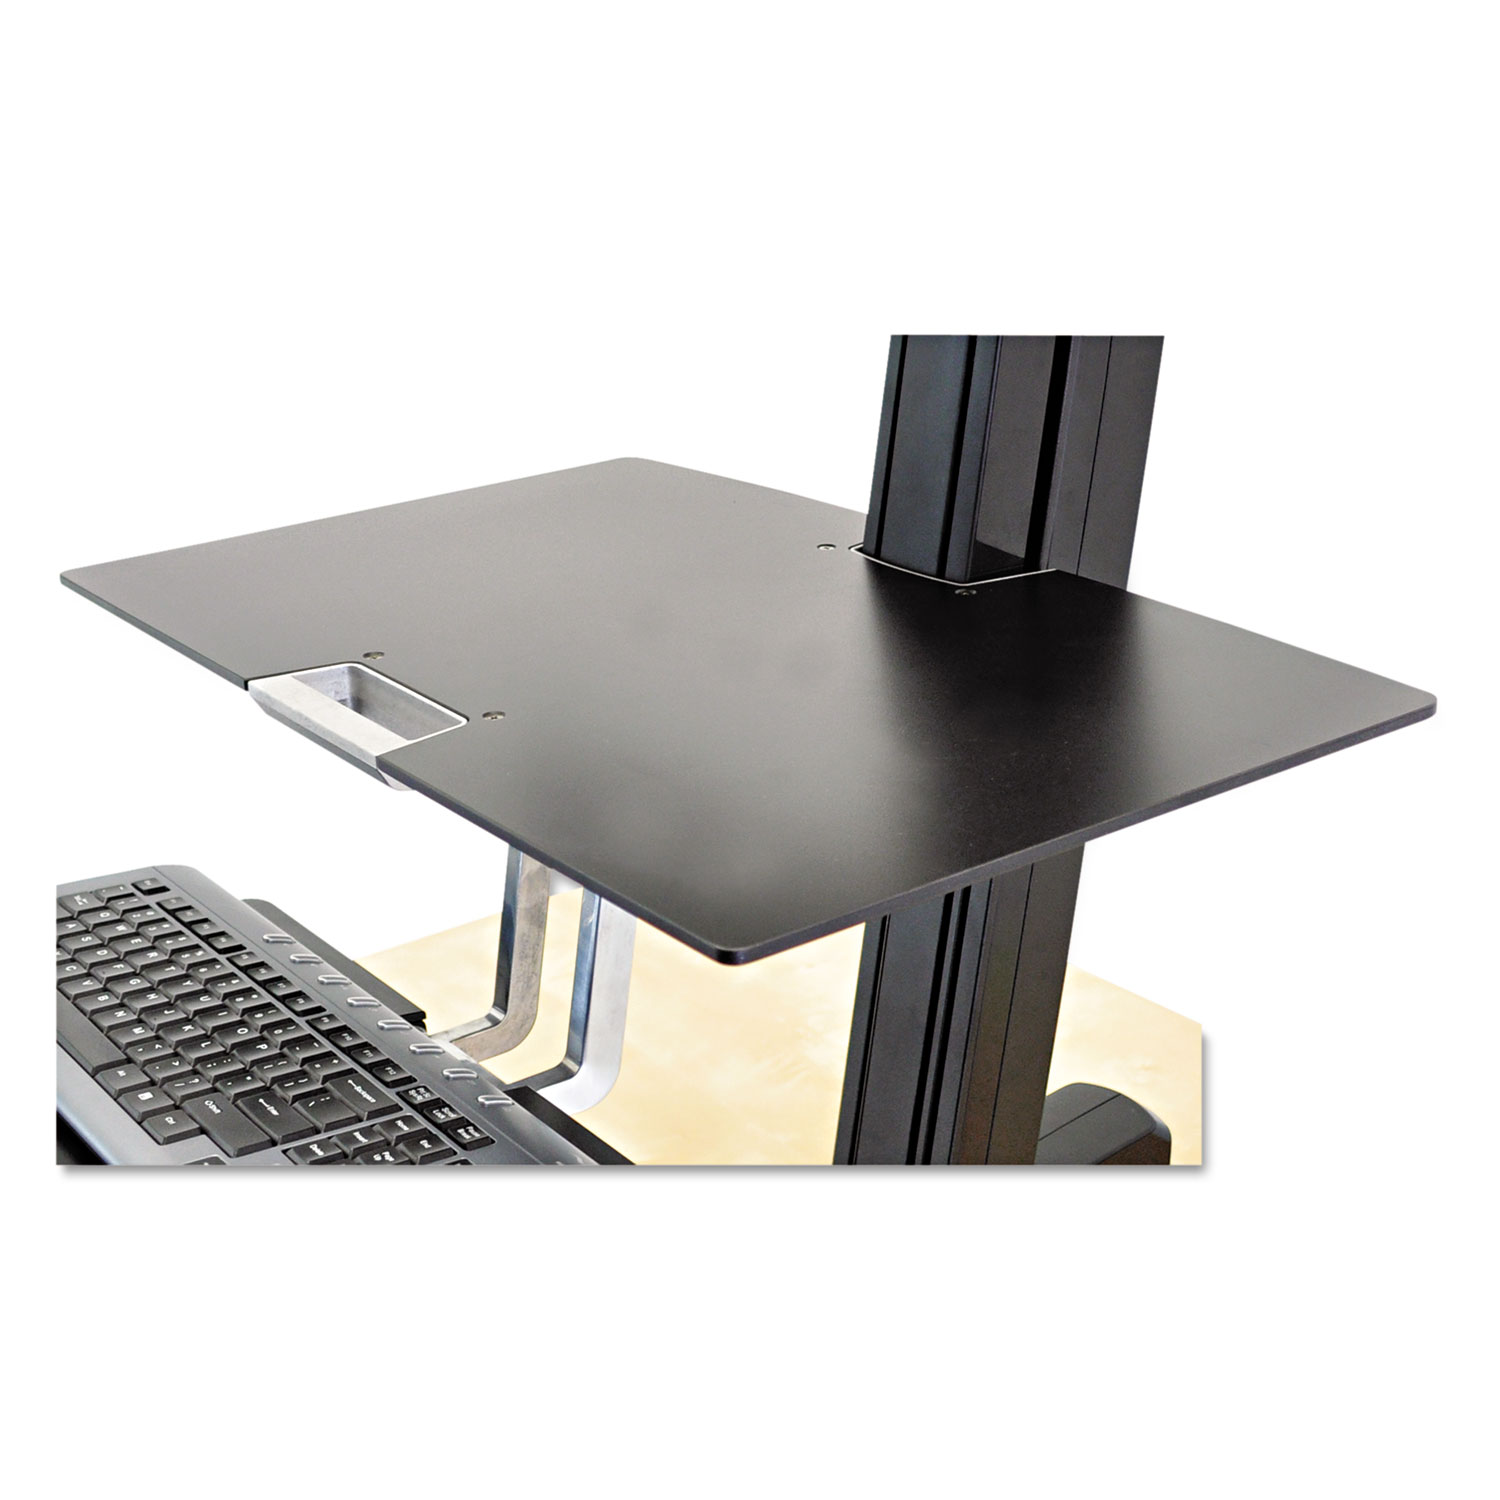  WorkFit by Ergotron 97-581-019 Worksurface for WorkFit-S Workstations without Worksurface, 23w x 15d, Black (ERG97581019) 